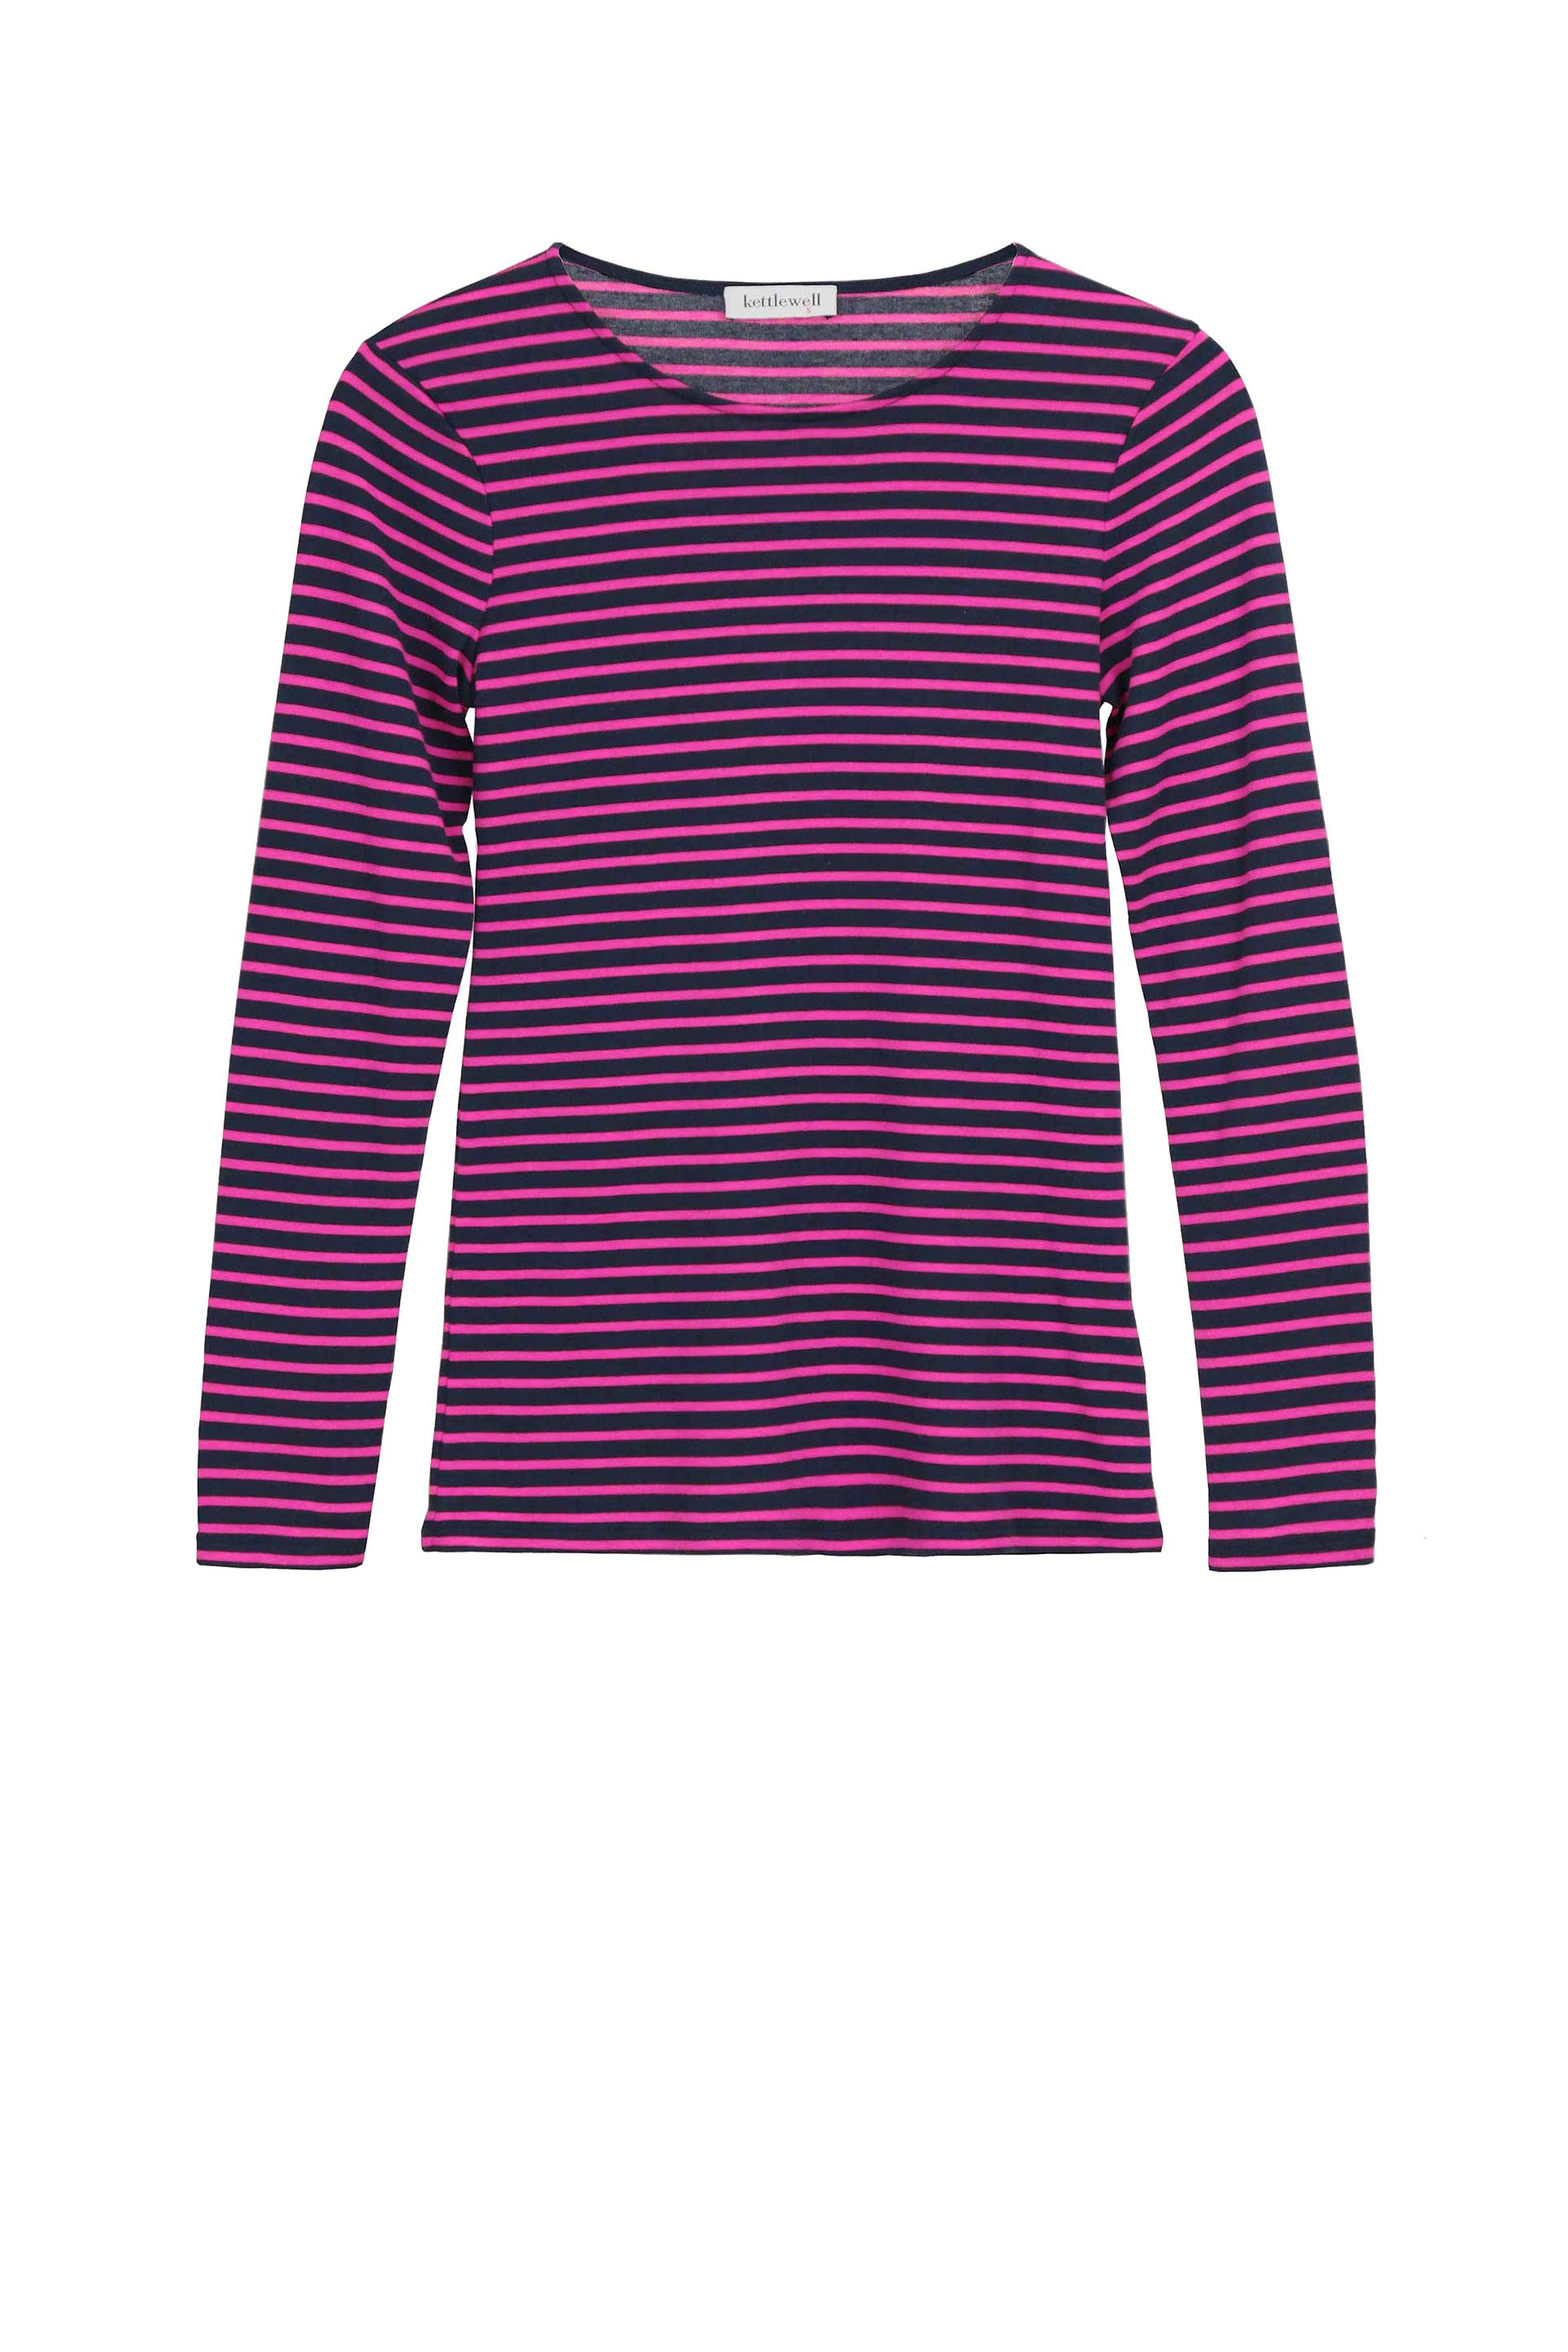 24123_stripey-pima-tee_sultry-navy-and-hot-pink_b_edit.jpg